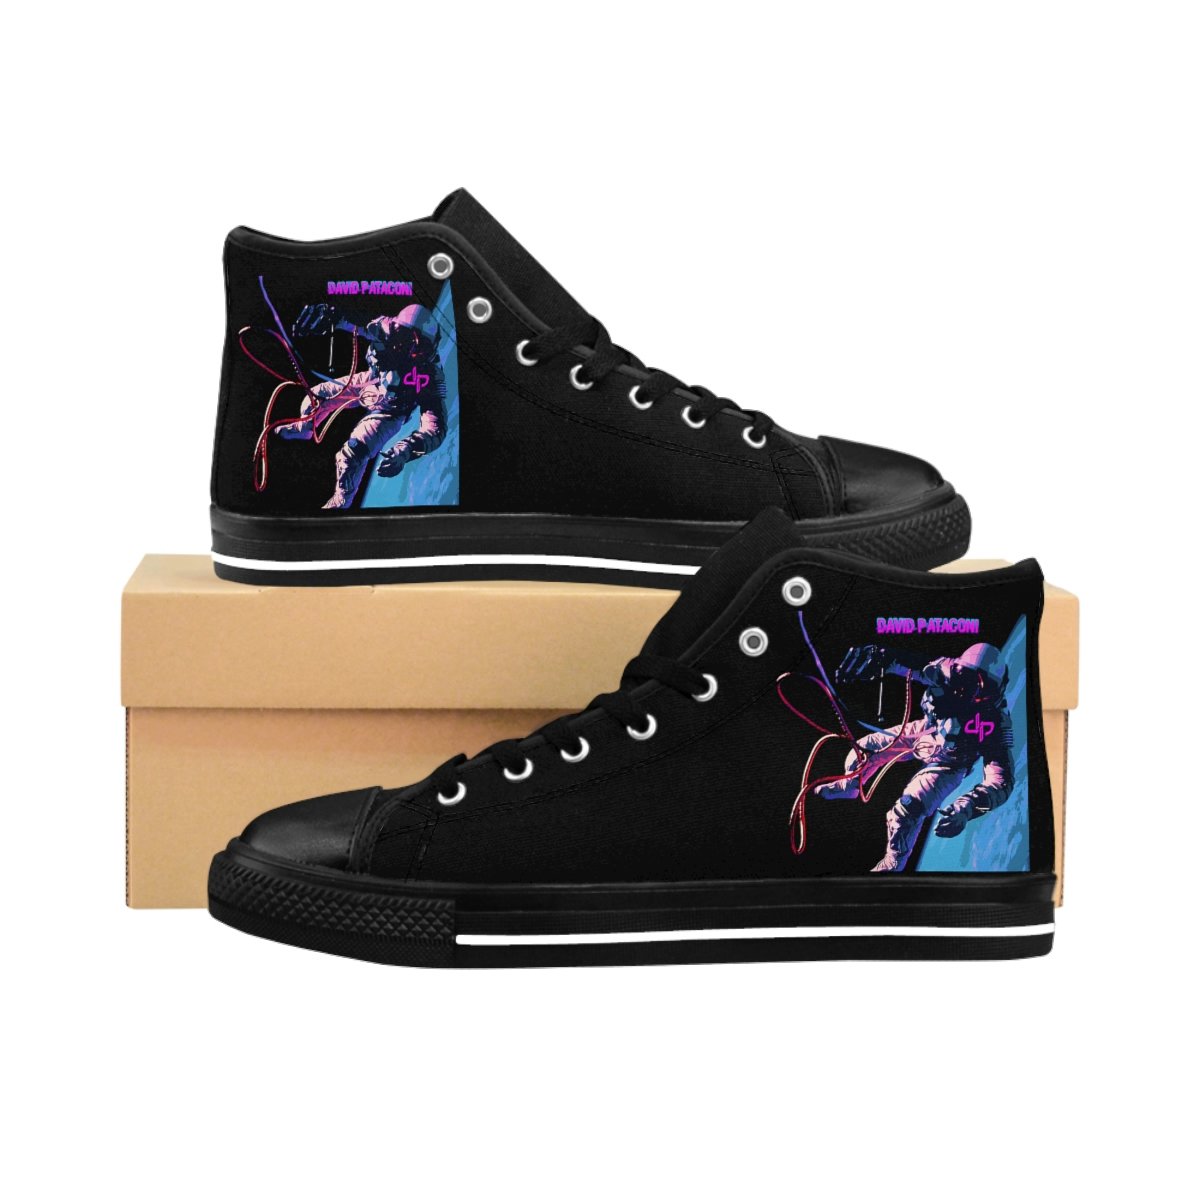 David Pataconi Space For Canvas Men’s High-top Sneakers